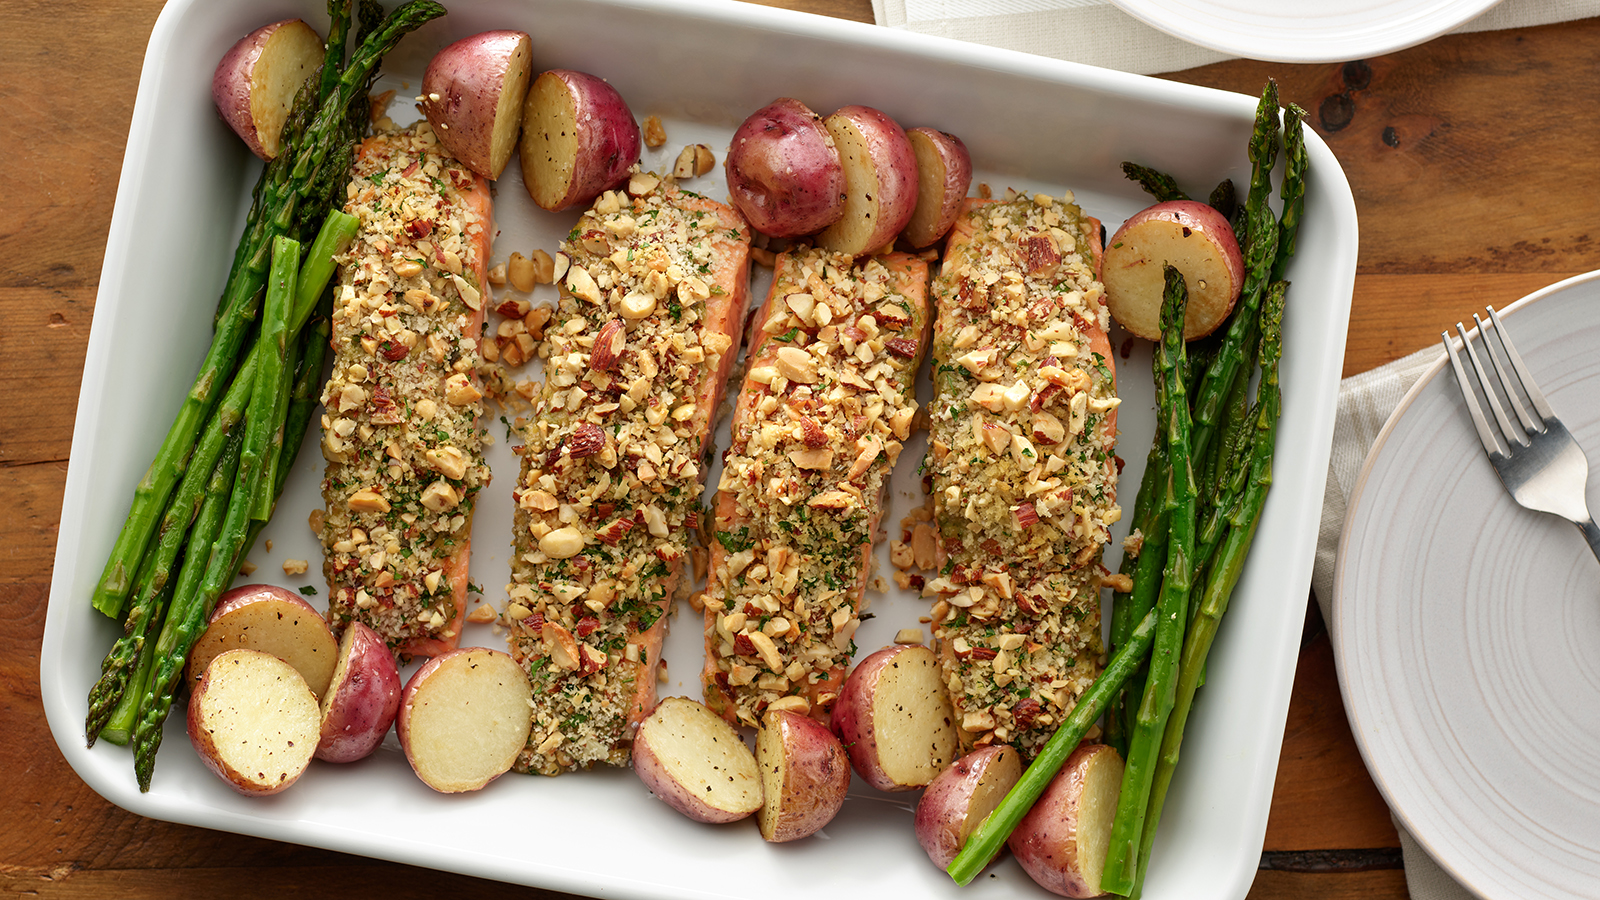 Mixed Nut Crusted Salmon